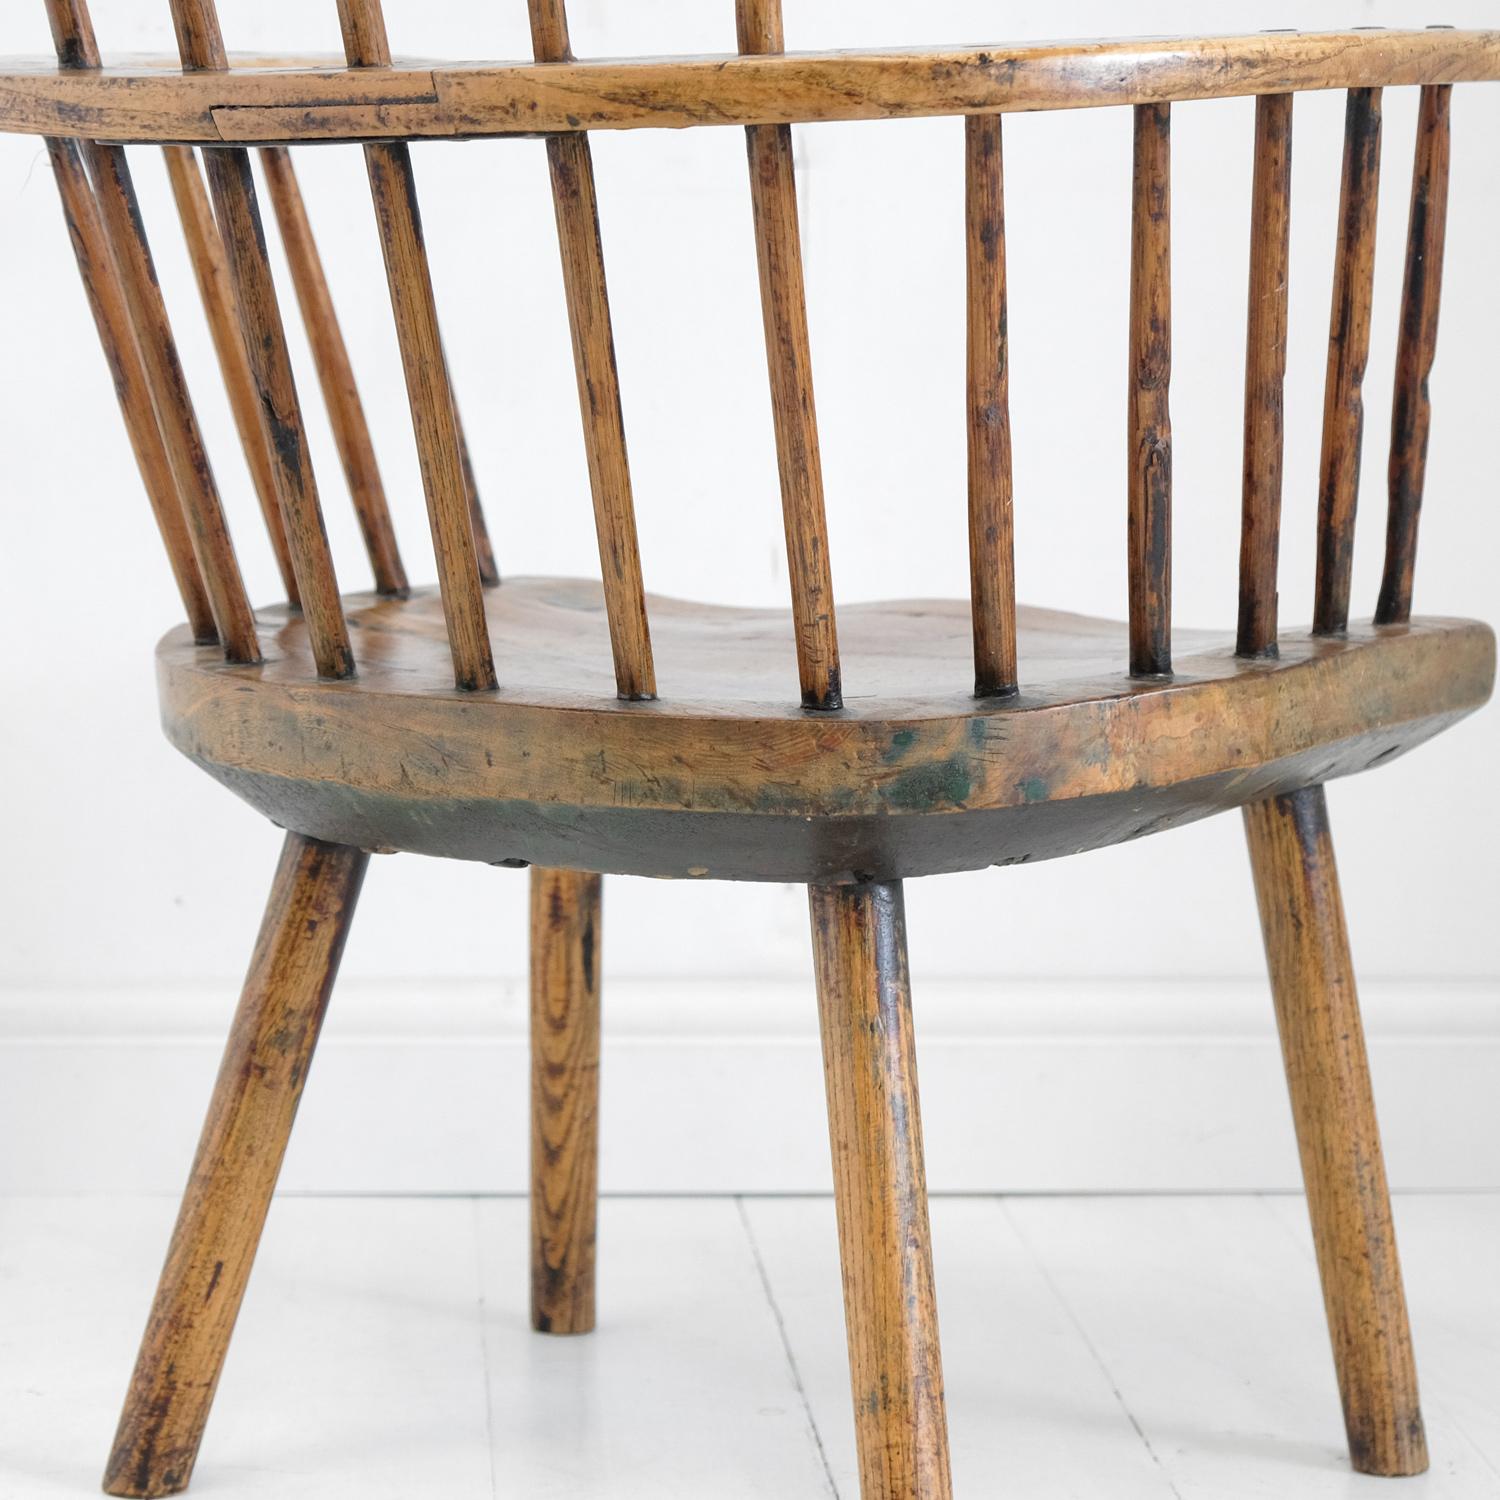 Primitive Welsh Stick Chair, Vernacular Windsor, Country Armchair 8